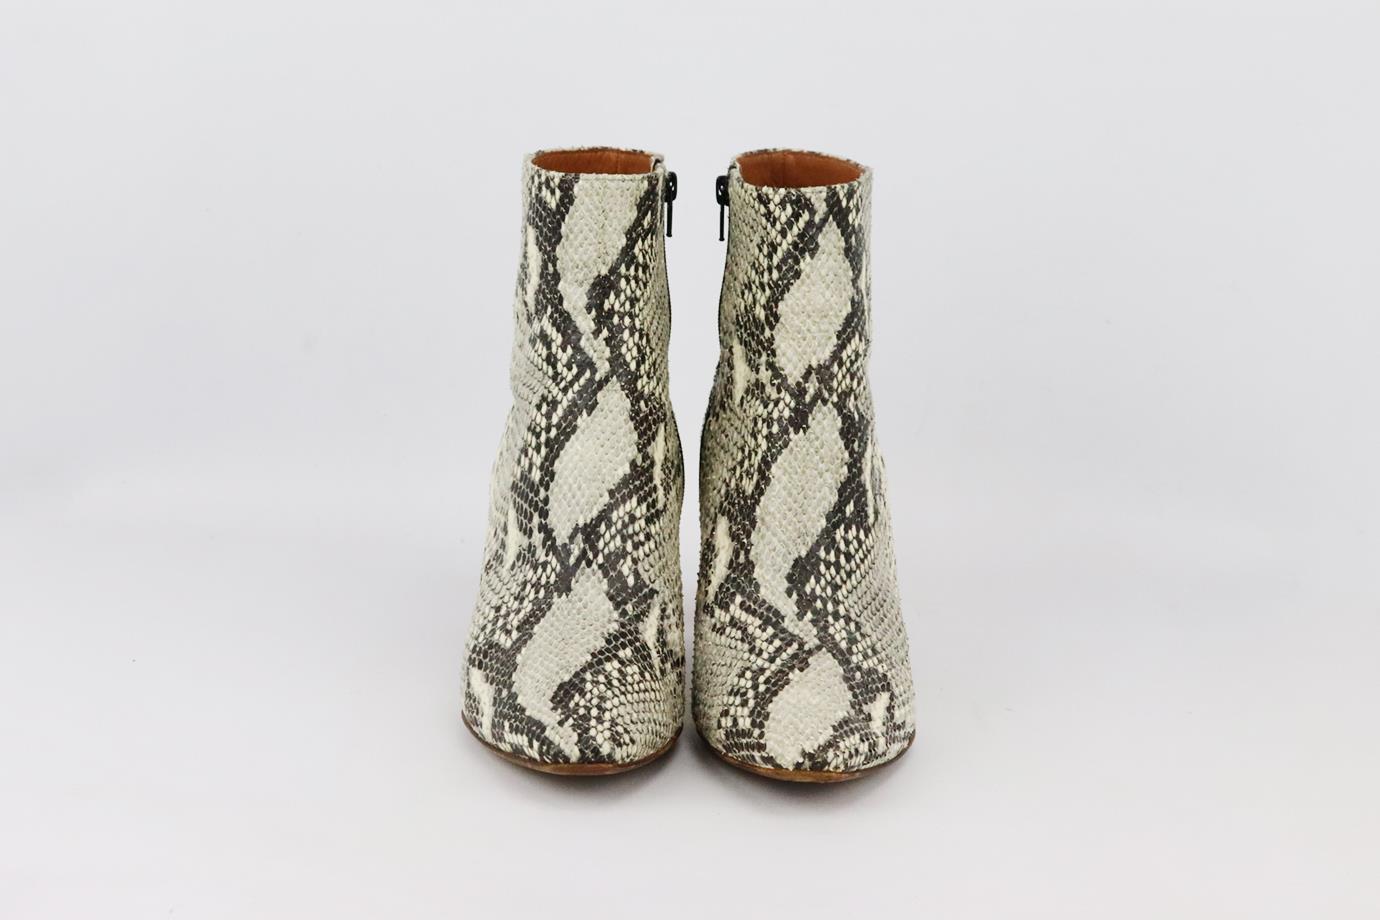 VETEMENTS SNAKESKIN AND LEATHER ANKLE BOOTS EU 39 UK 6 US 9